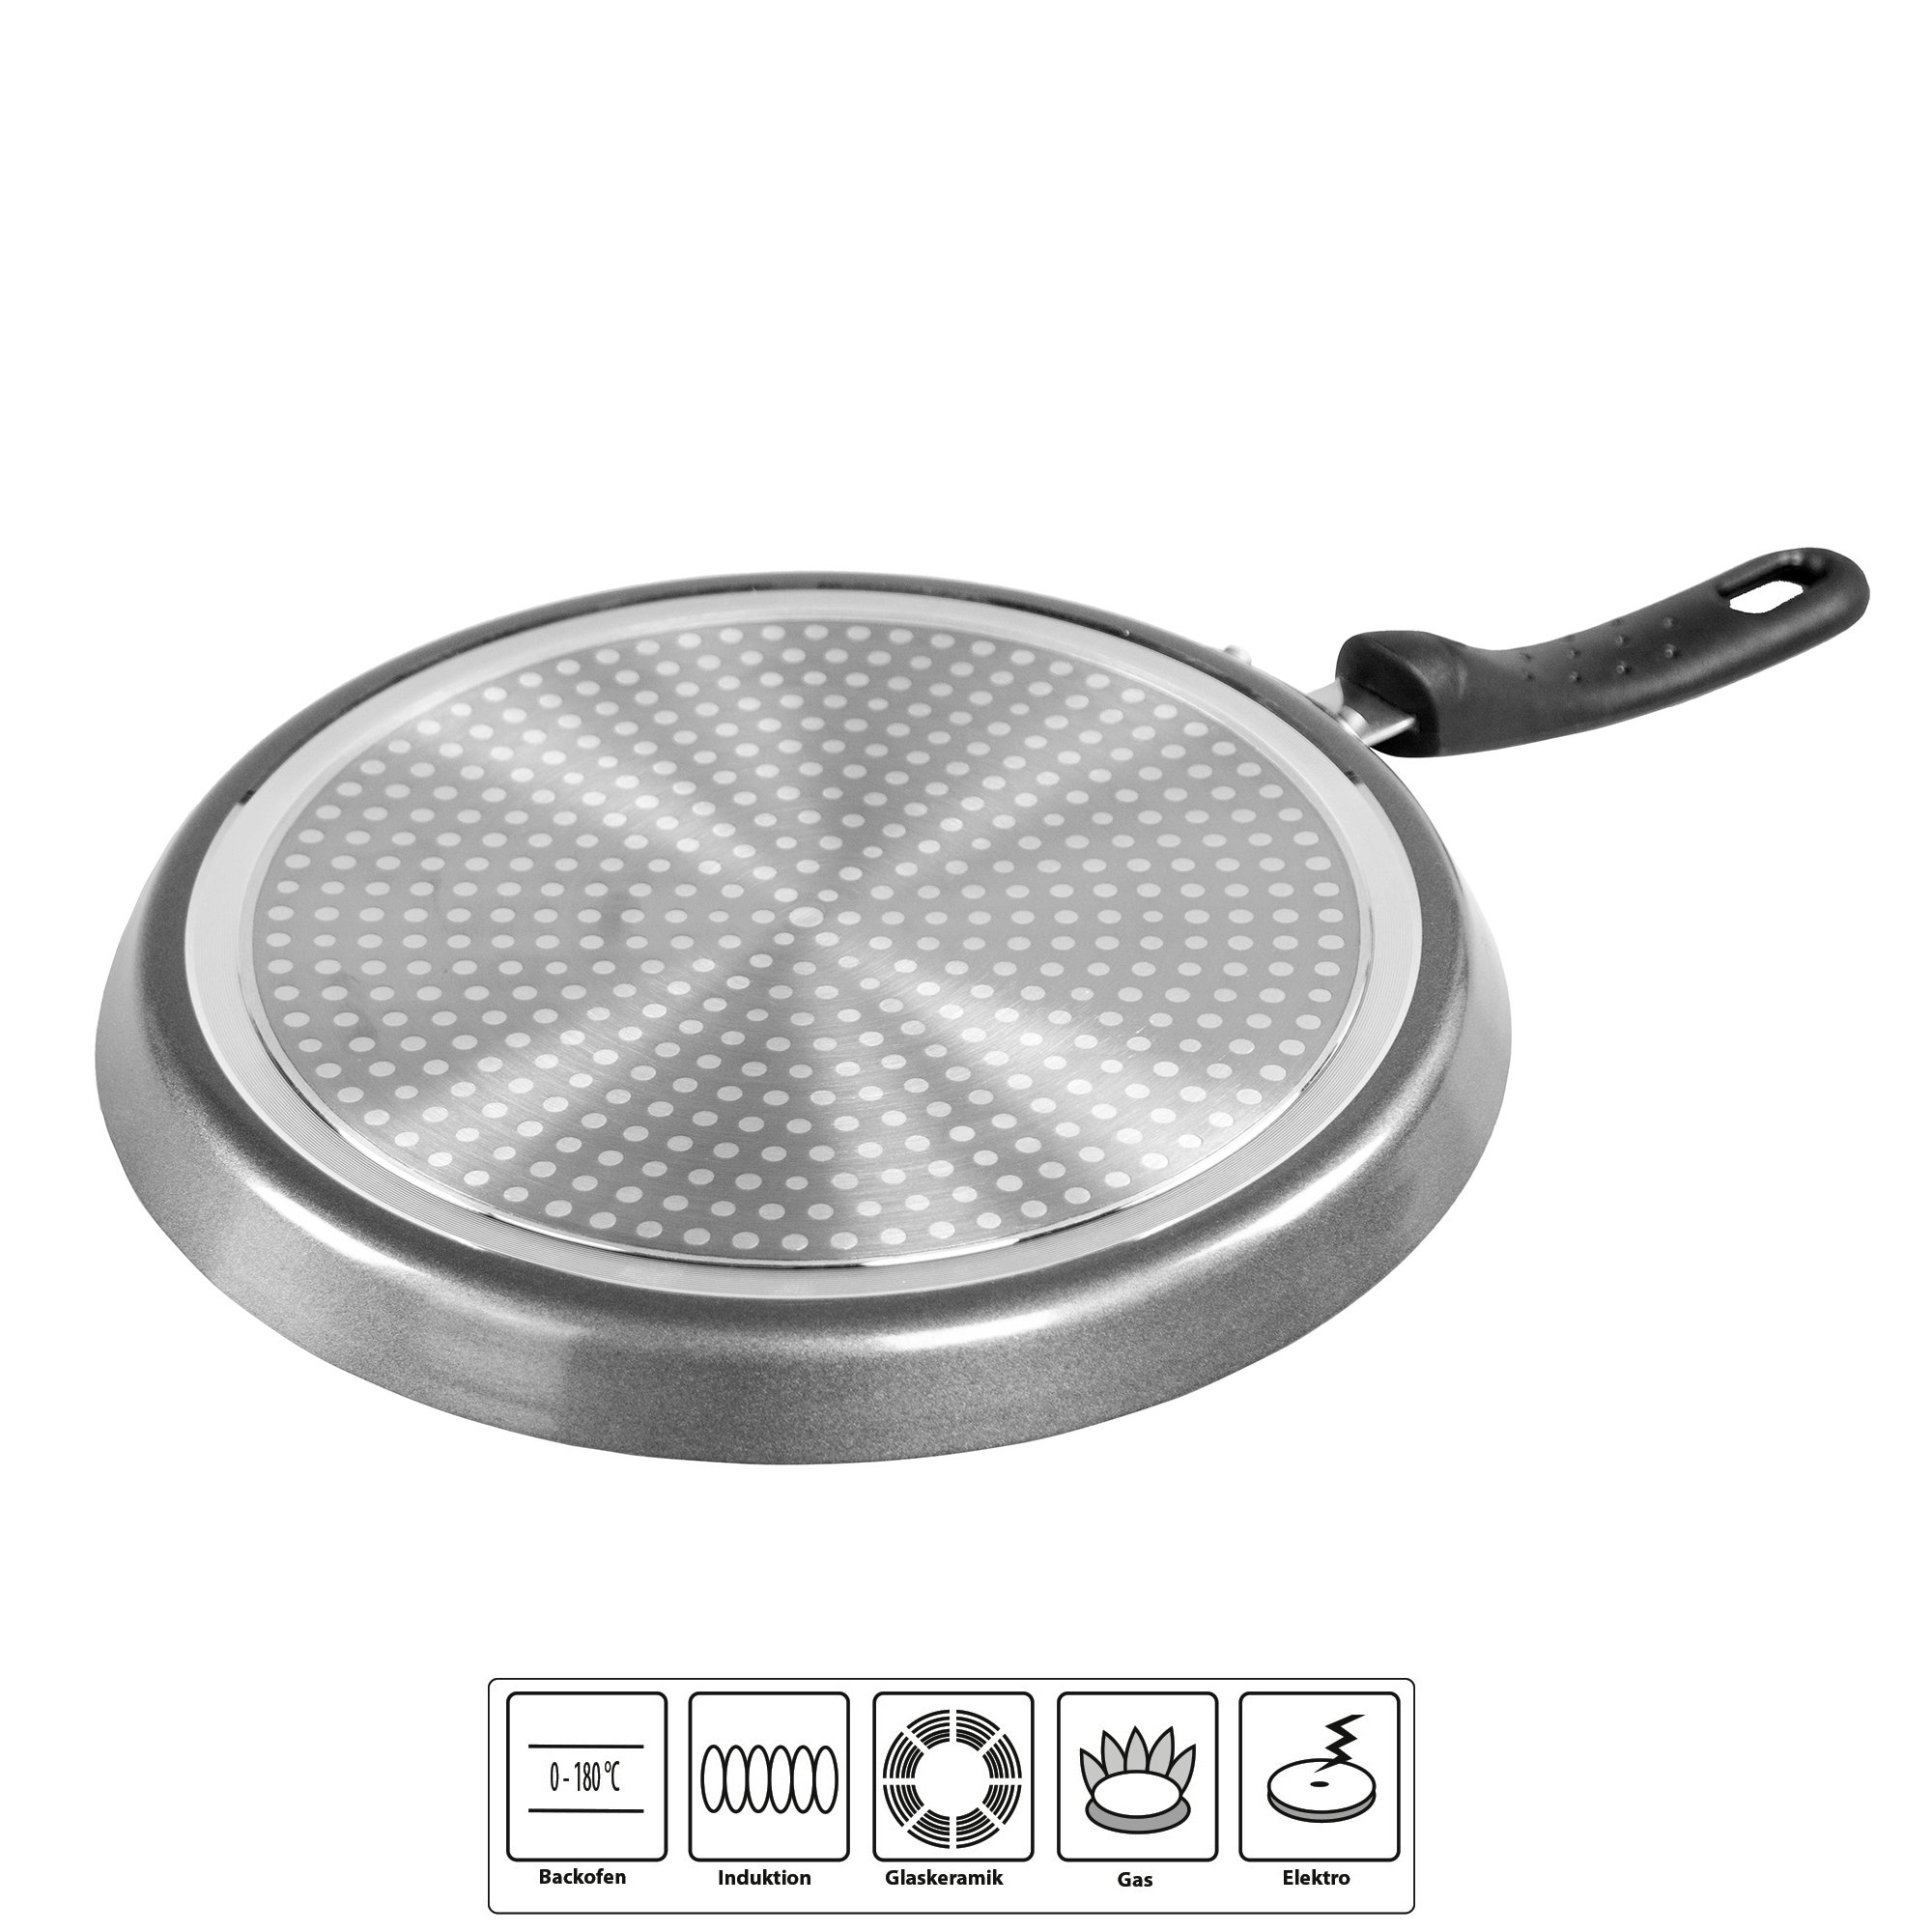 STONELINE® Crepe Pan 25 cm, with Batter Spreader, Flat Non-Stick Pan